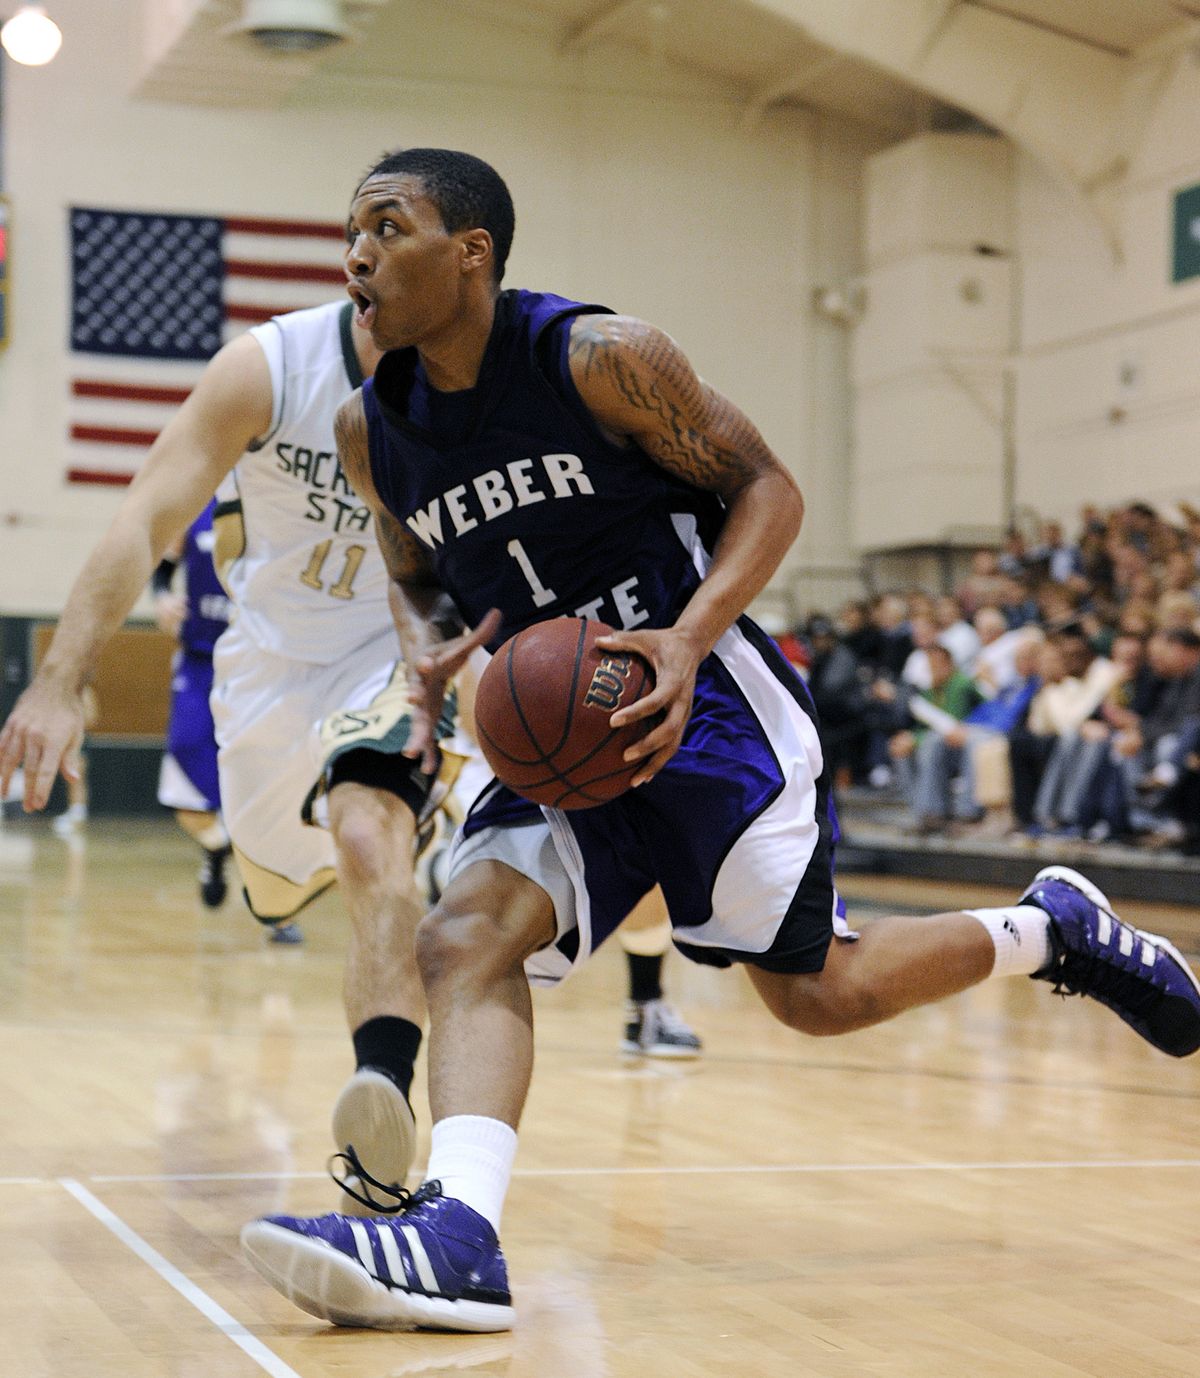 Weber State’s Damian Lillard leads the nation in scoring at 24.3 points per game. (Associated Press)